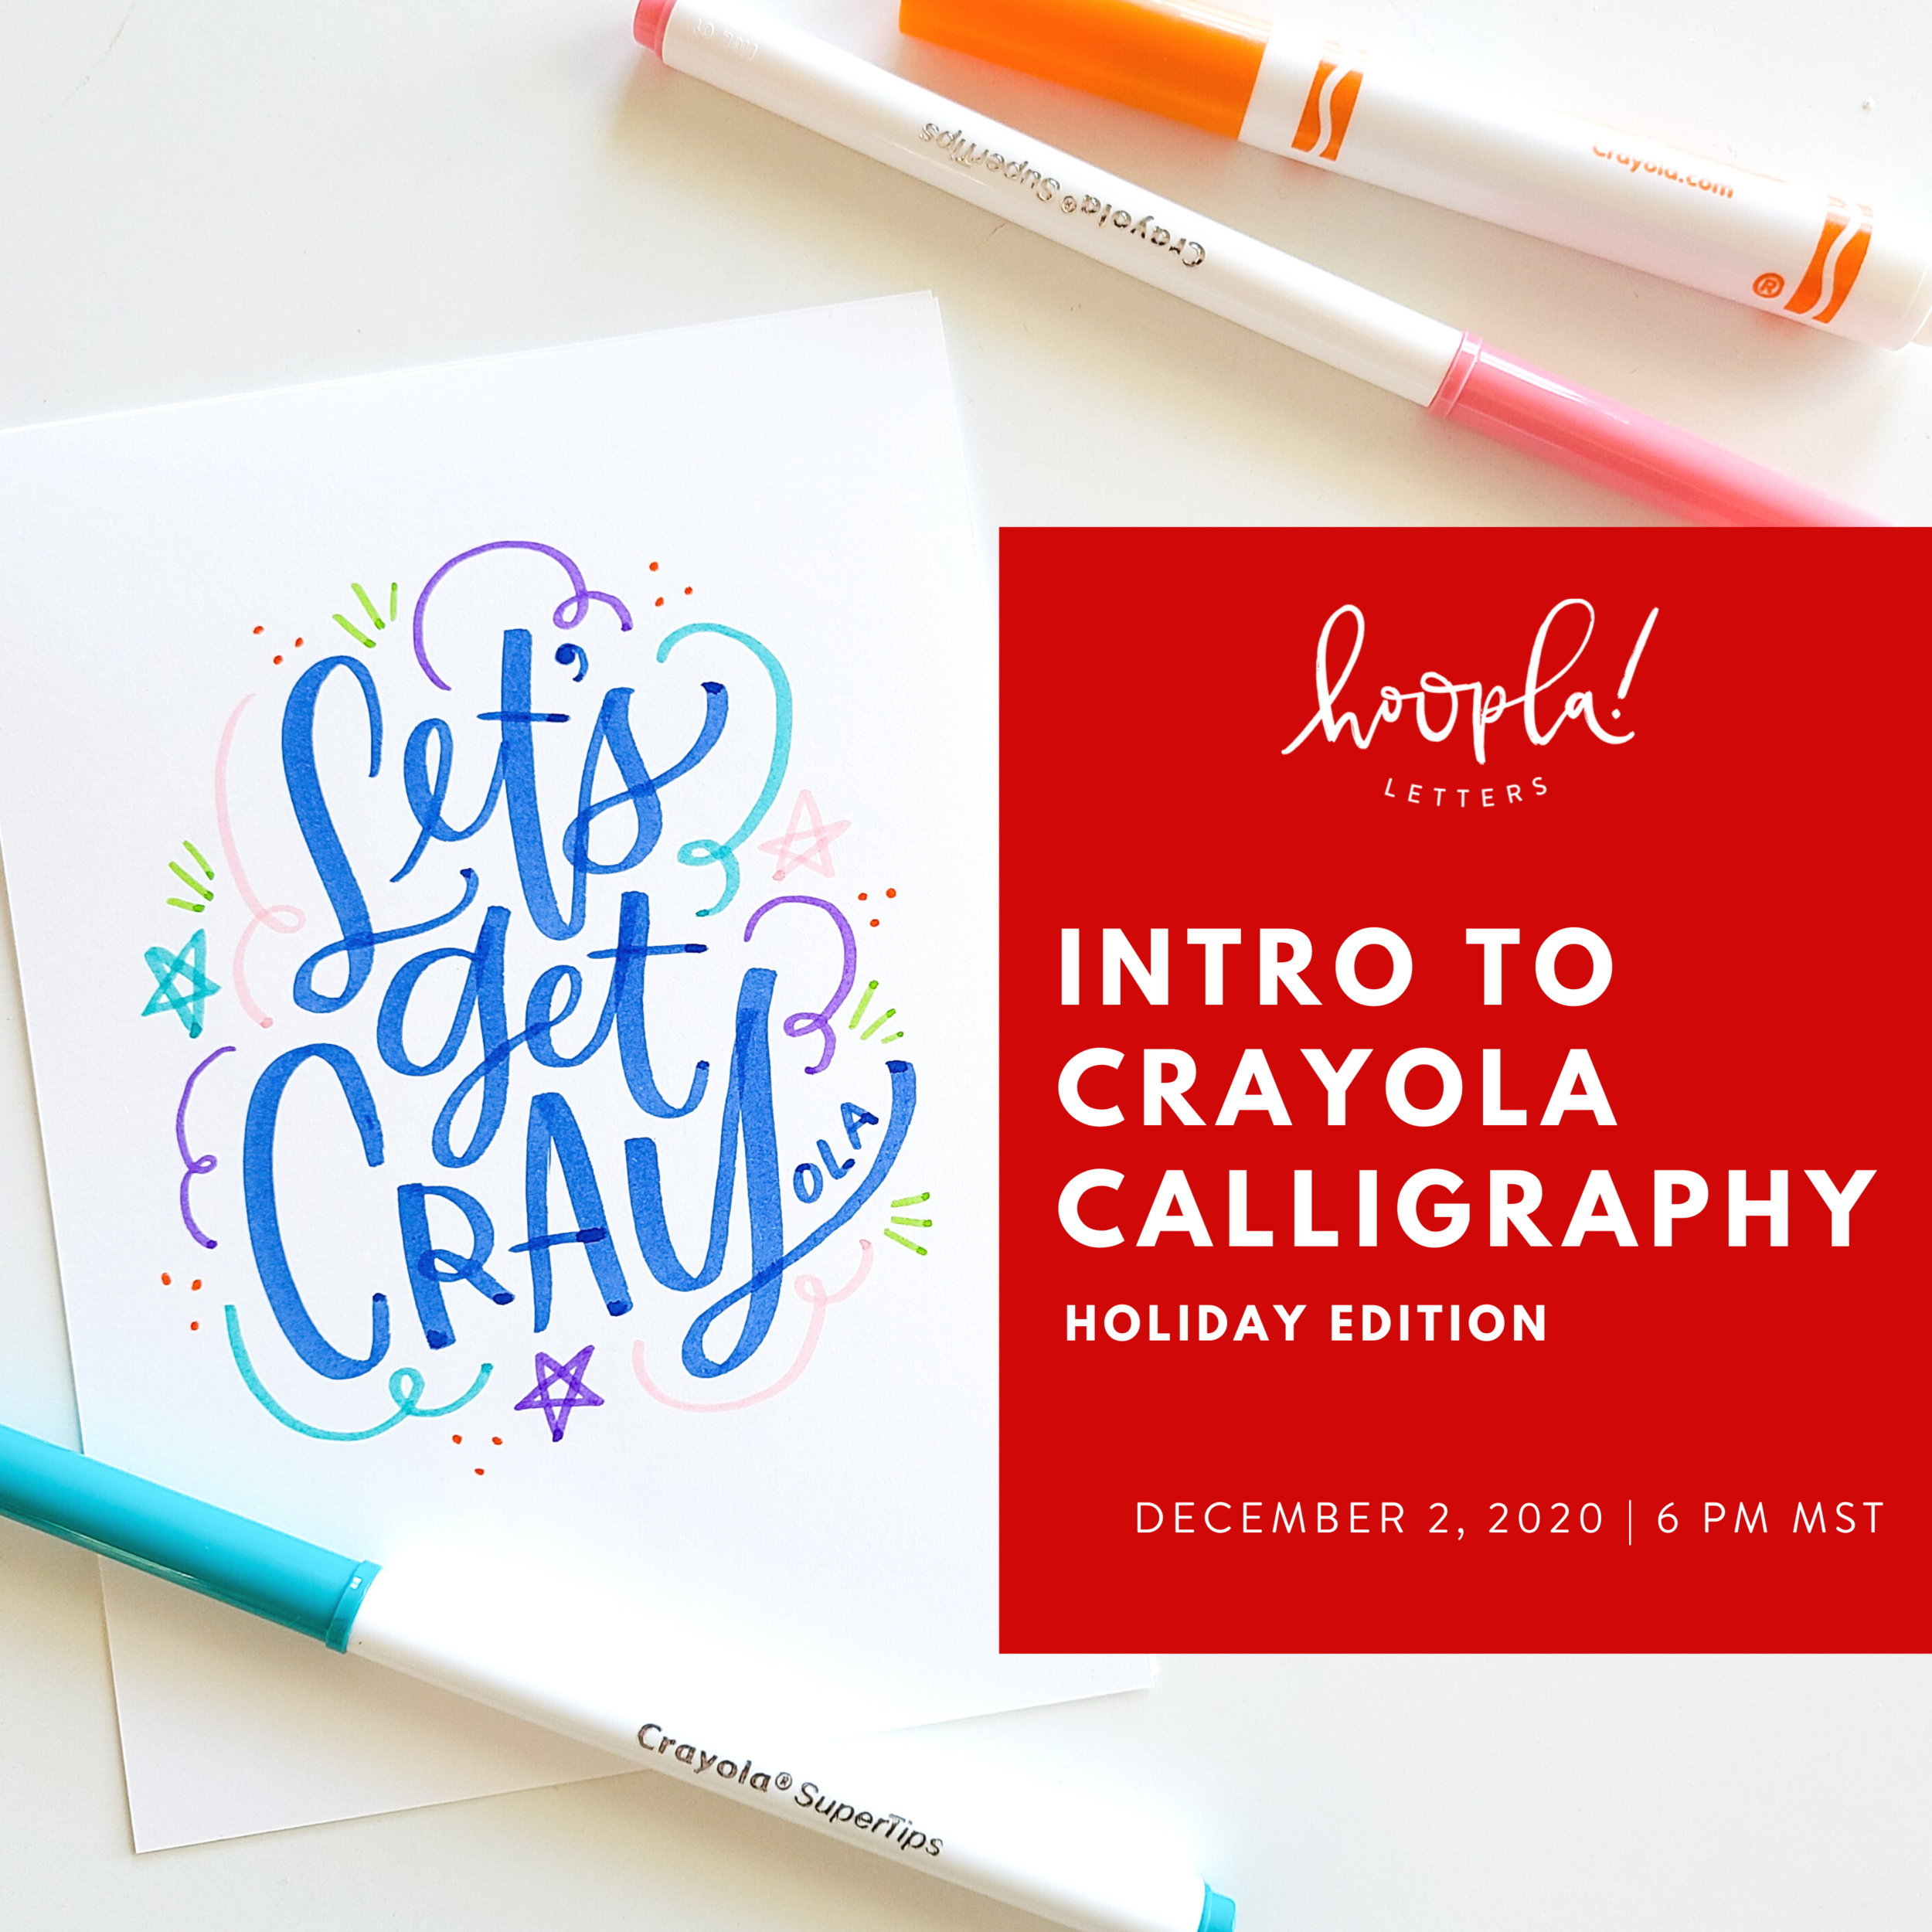 Let's Get Started Calligraphy and Hand Lettering Workbook for Beginners